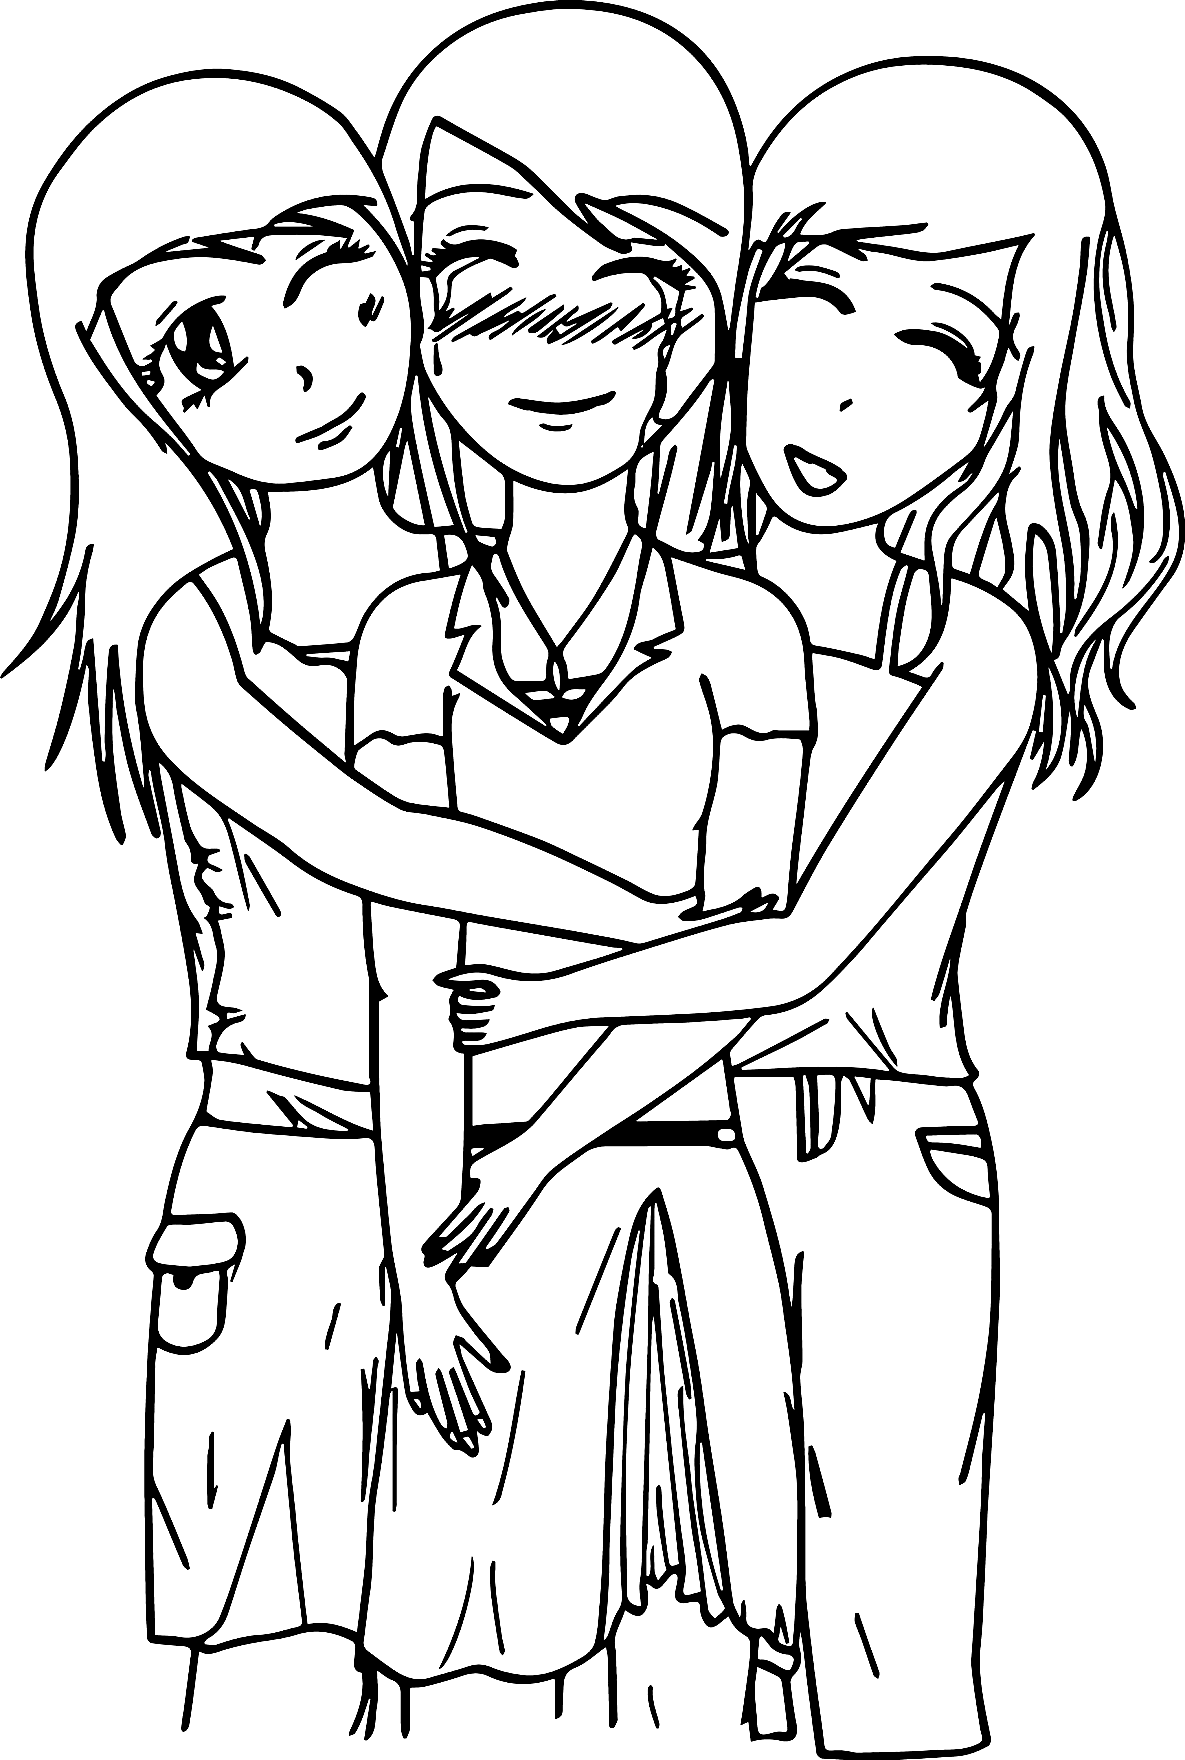 Three Best Friends Coloring Pages